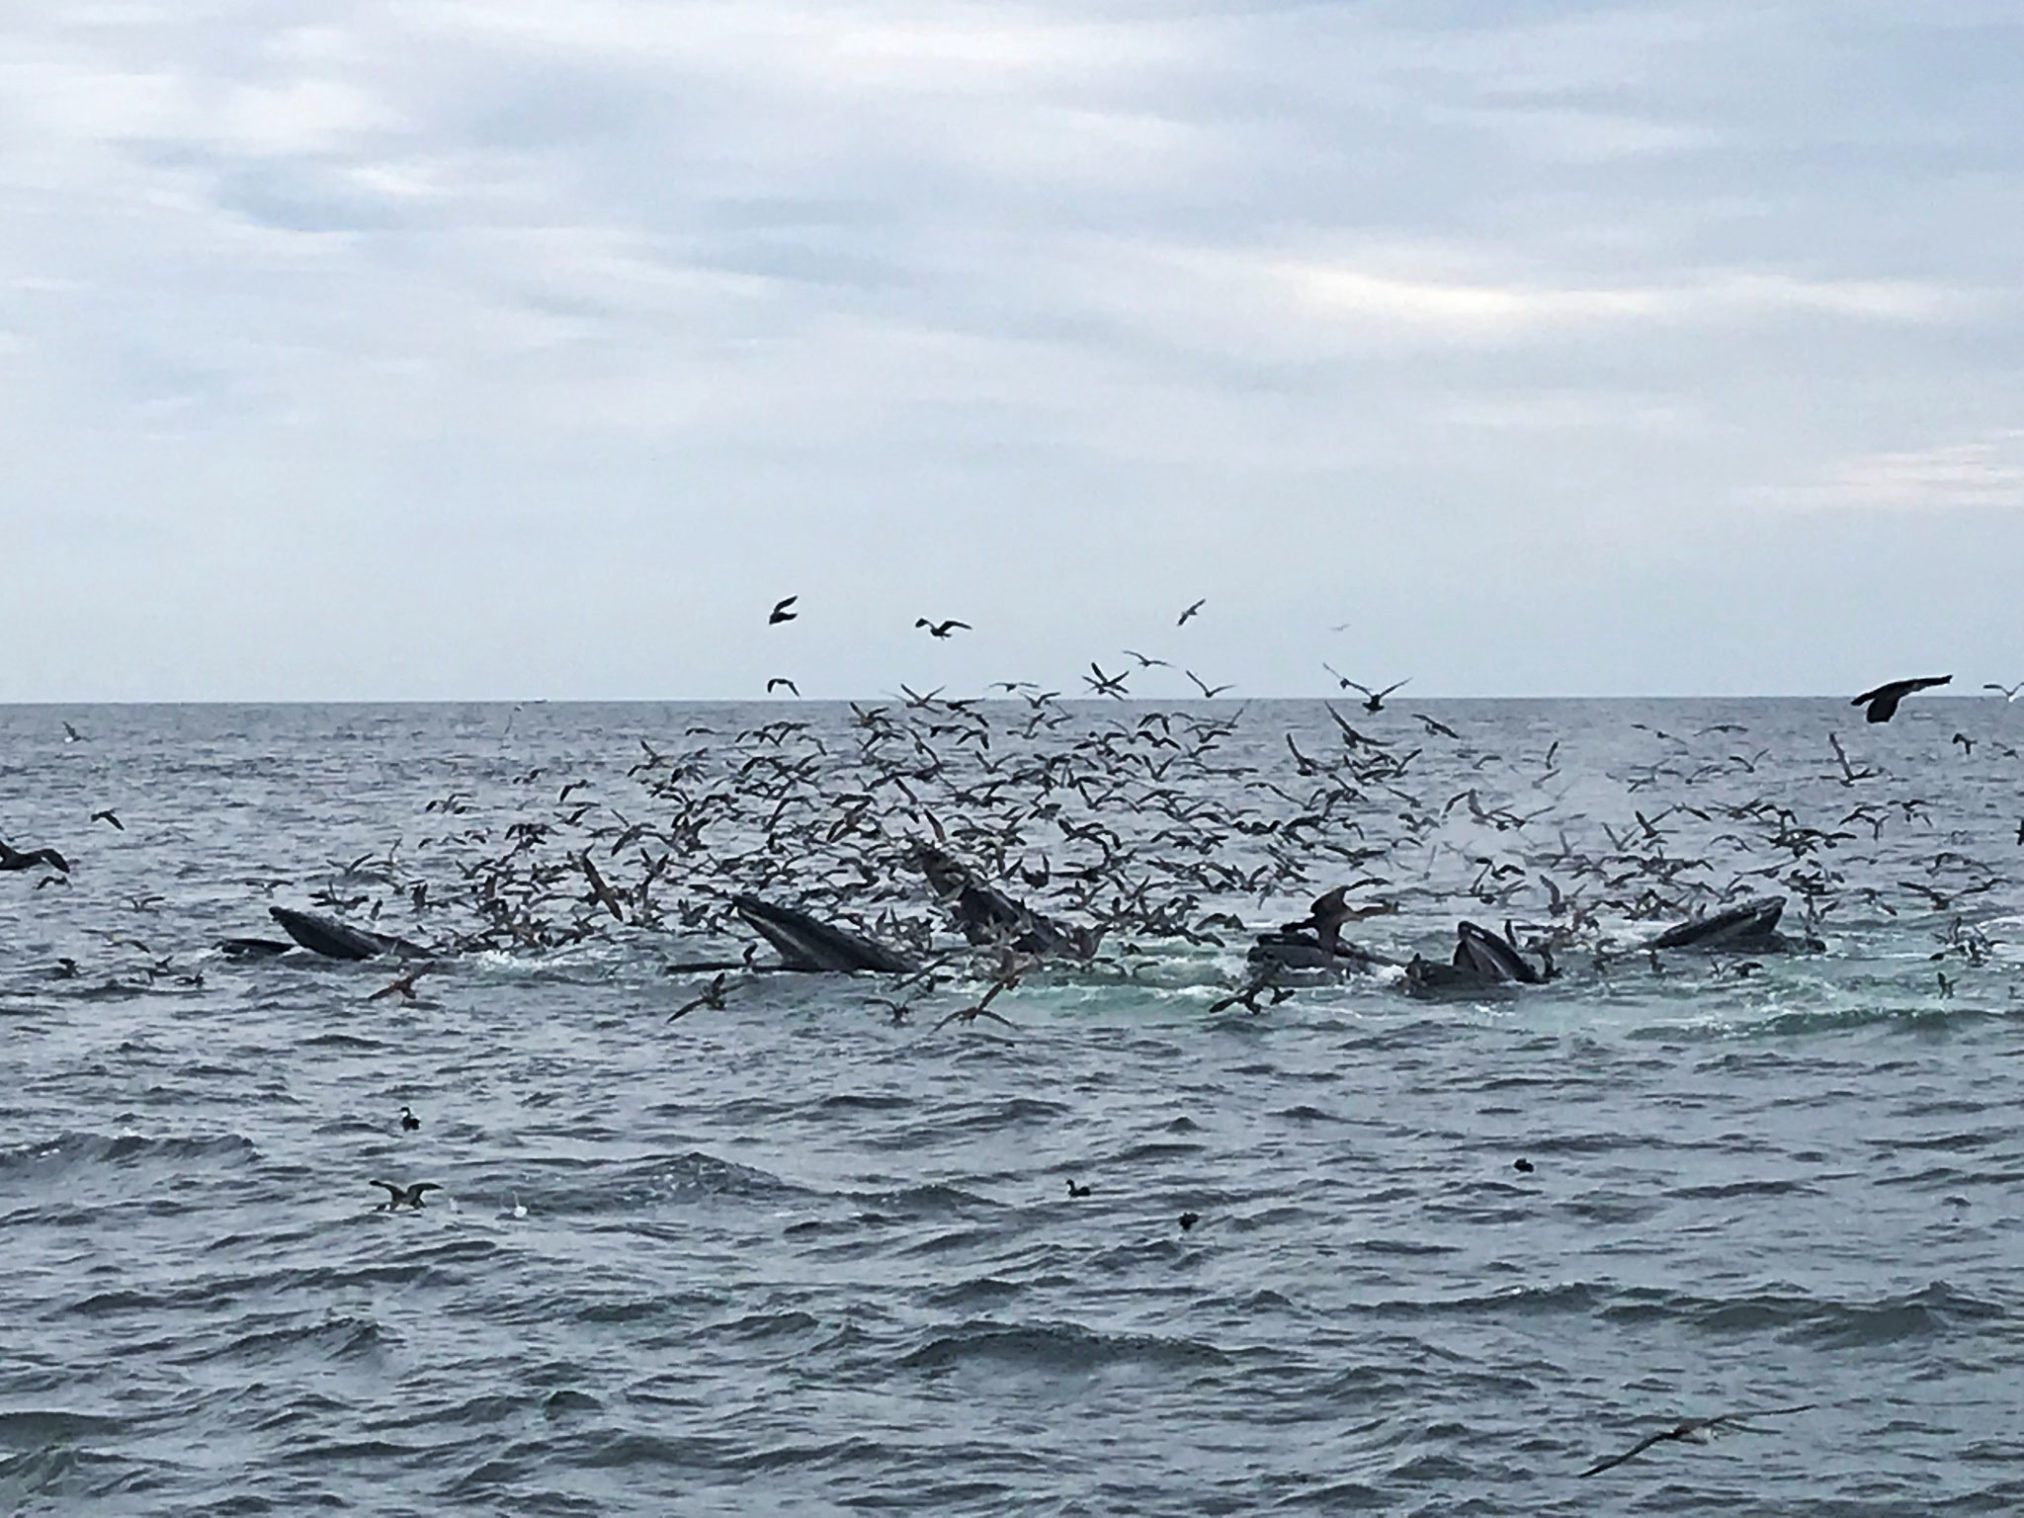 Birds flying above whales feeding off Provincetown on Cape Cod